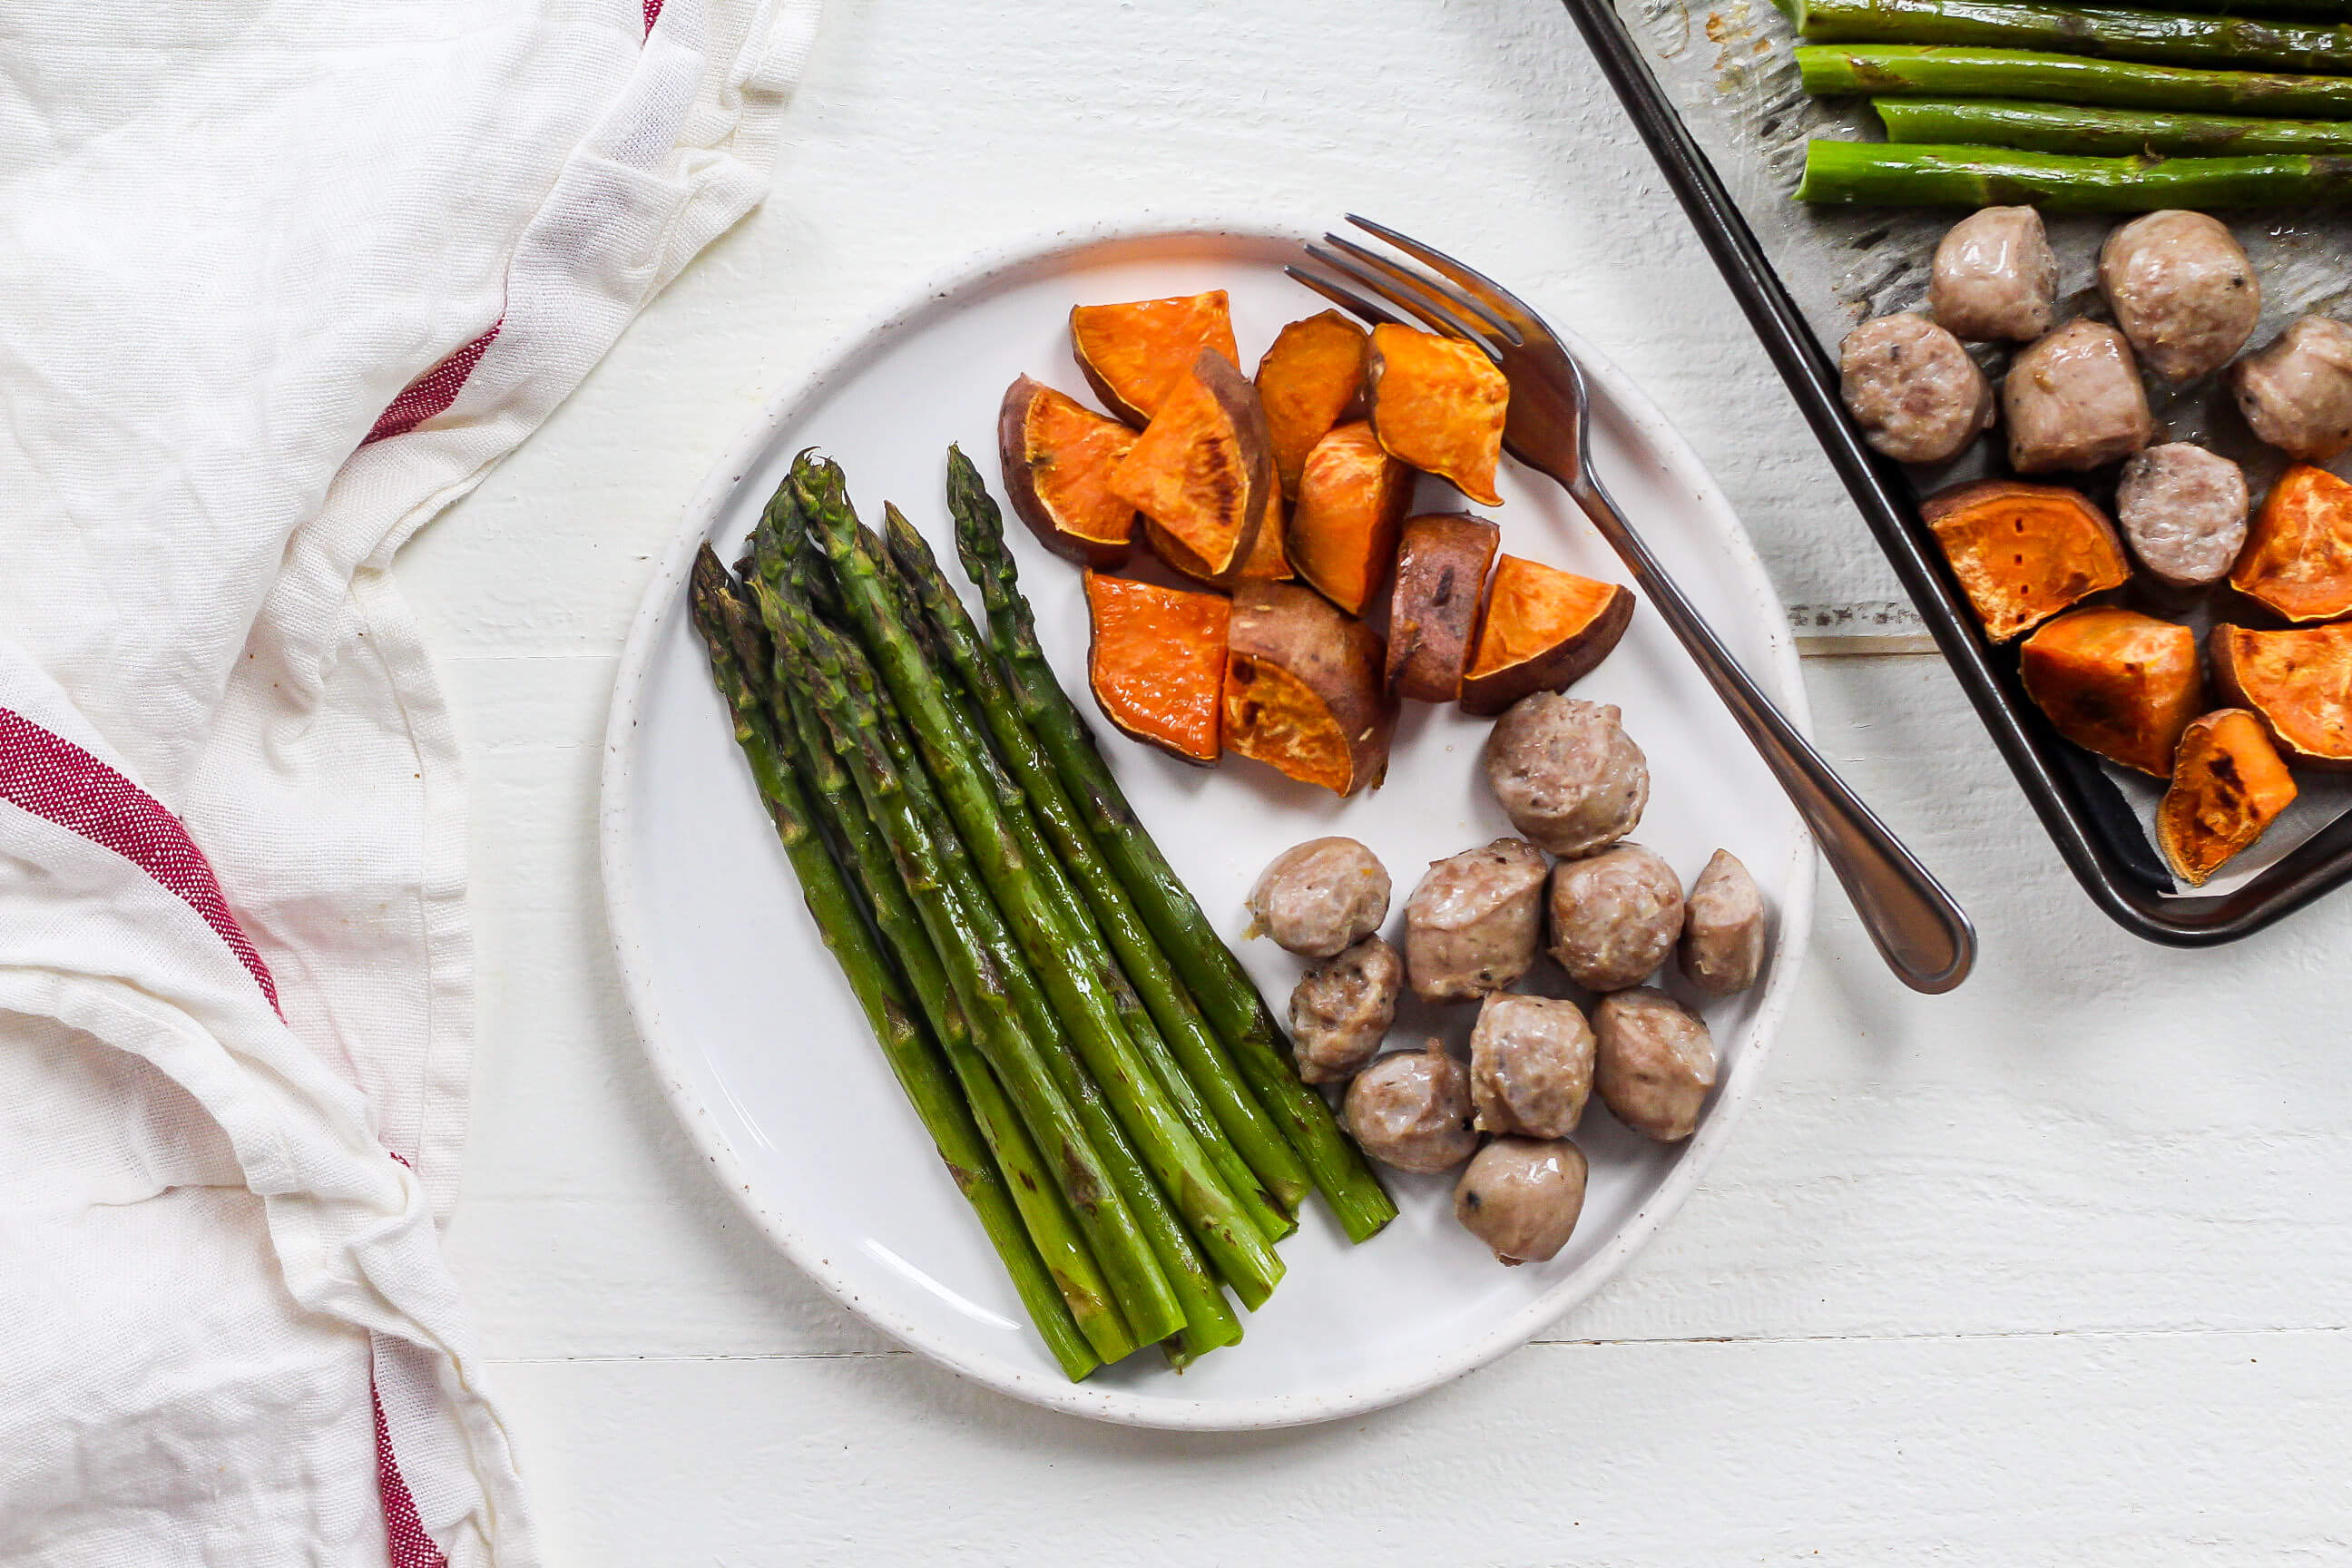 20 Simple Meals to Help Your Clients Hit Their Macros: One Pan Sausage, Sweet Potato & Asparagus